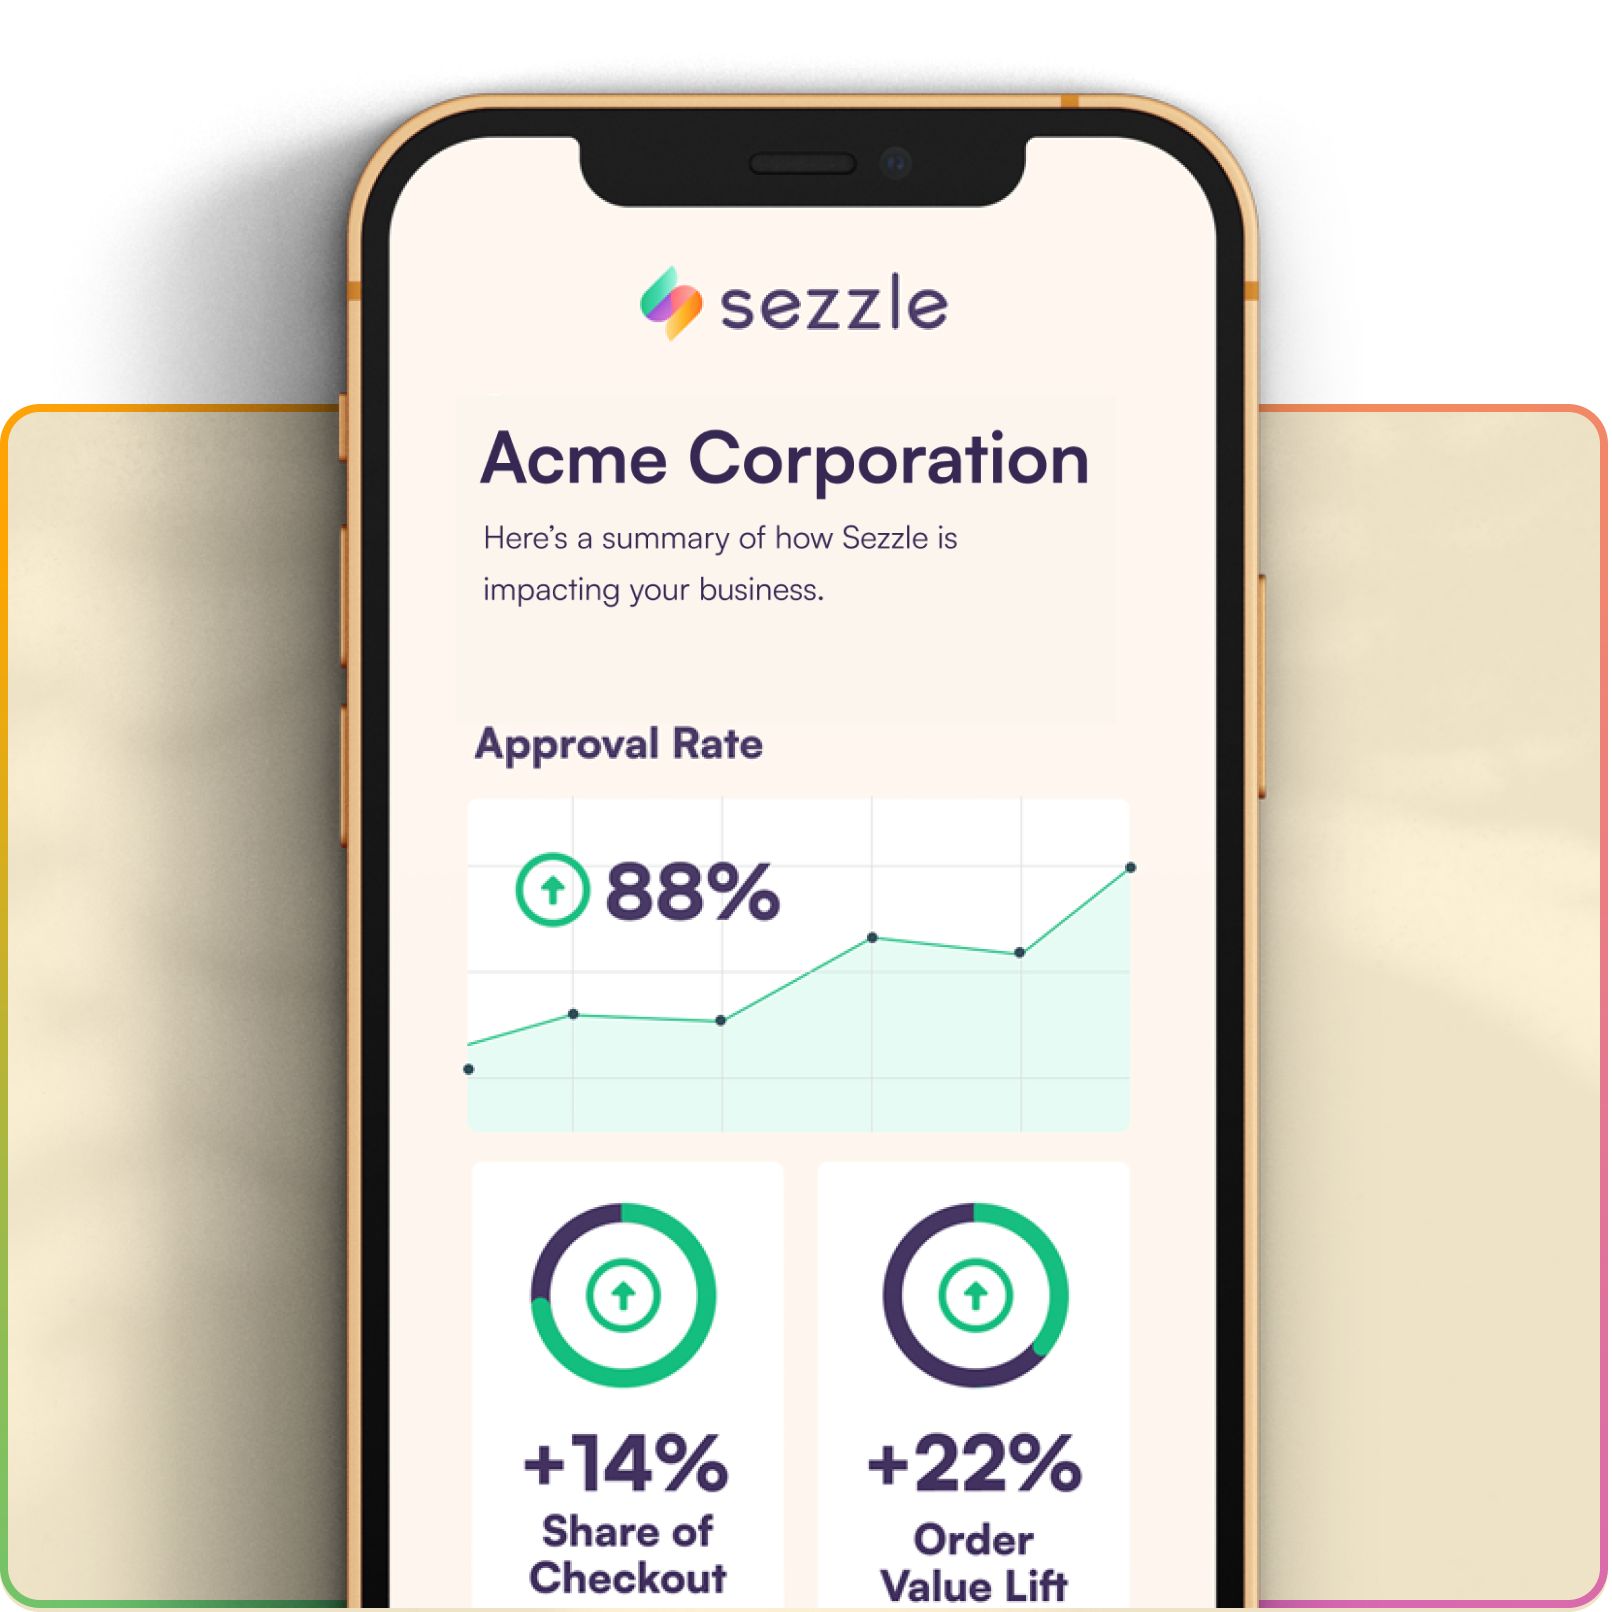 Typical Sezzle merchants see an 88% approval rate, 14% share of checkout, and 22% order value lift.